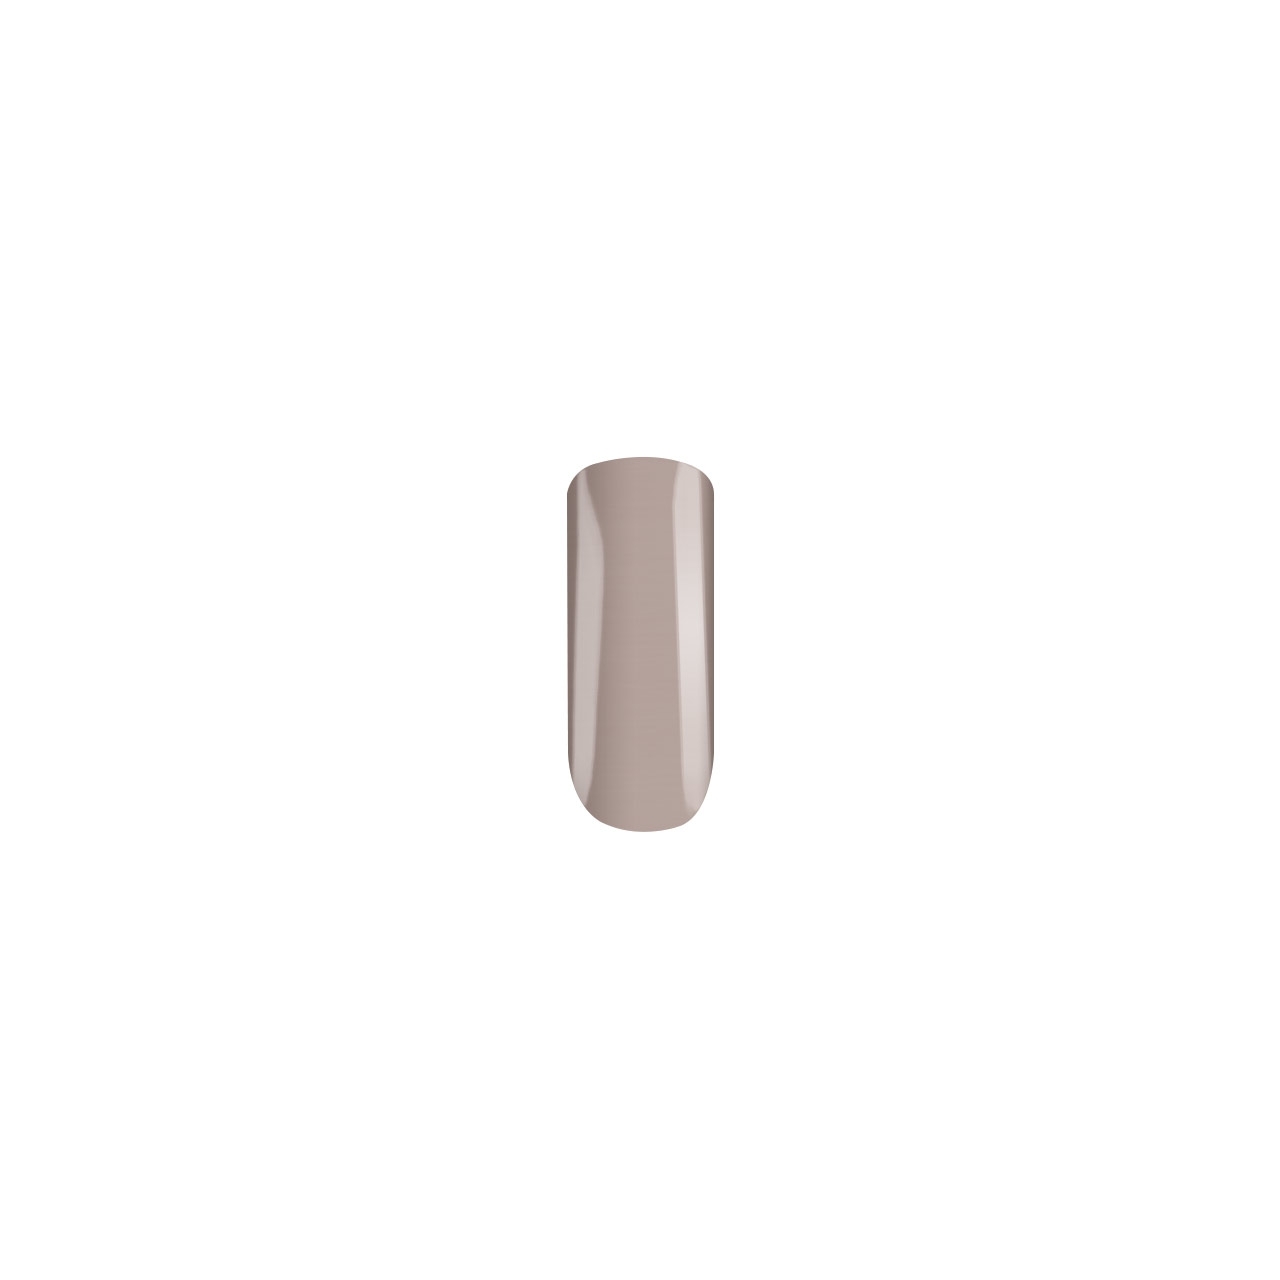 BAEHR BEAUTY CONCEPT - NAILS Nagellack nude soft pastell 11 ml